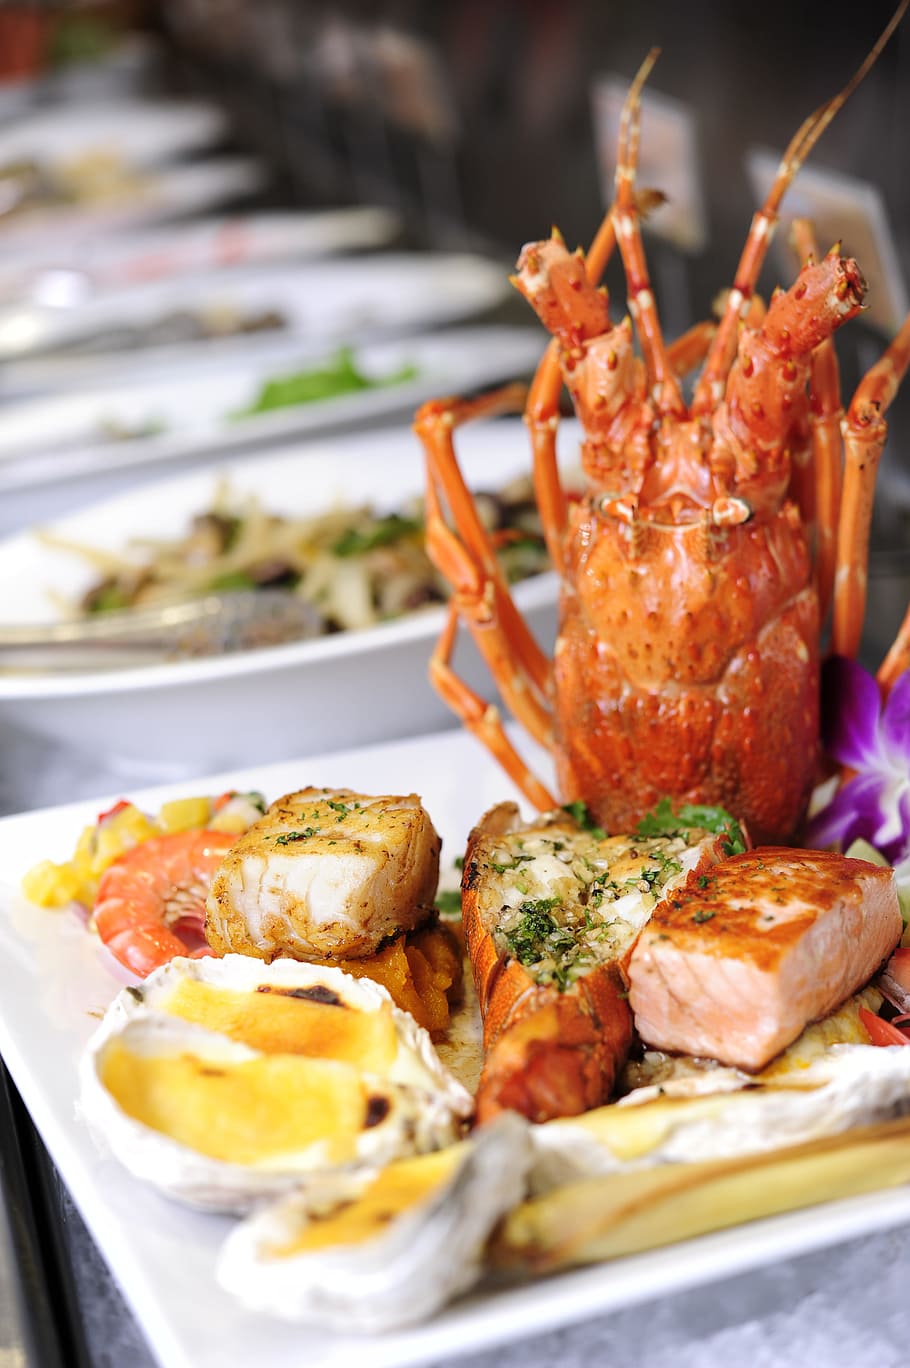 amigo, seafood, lobster, food and drink, food, ready-to-eat, freshness, meat, plate, healthy eating